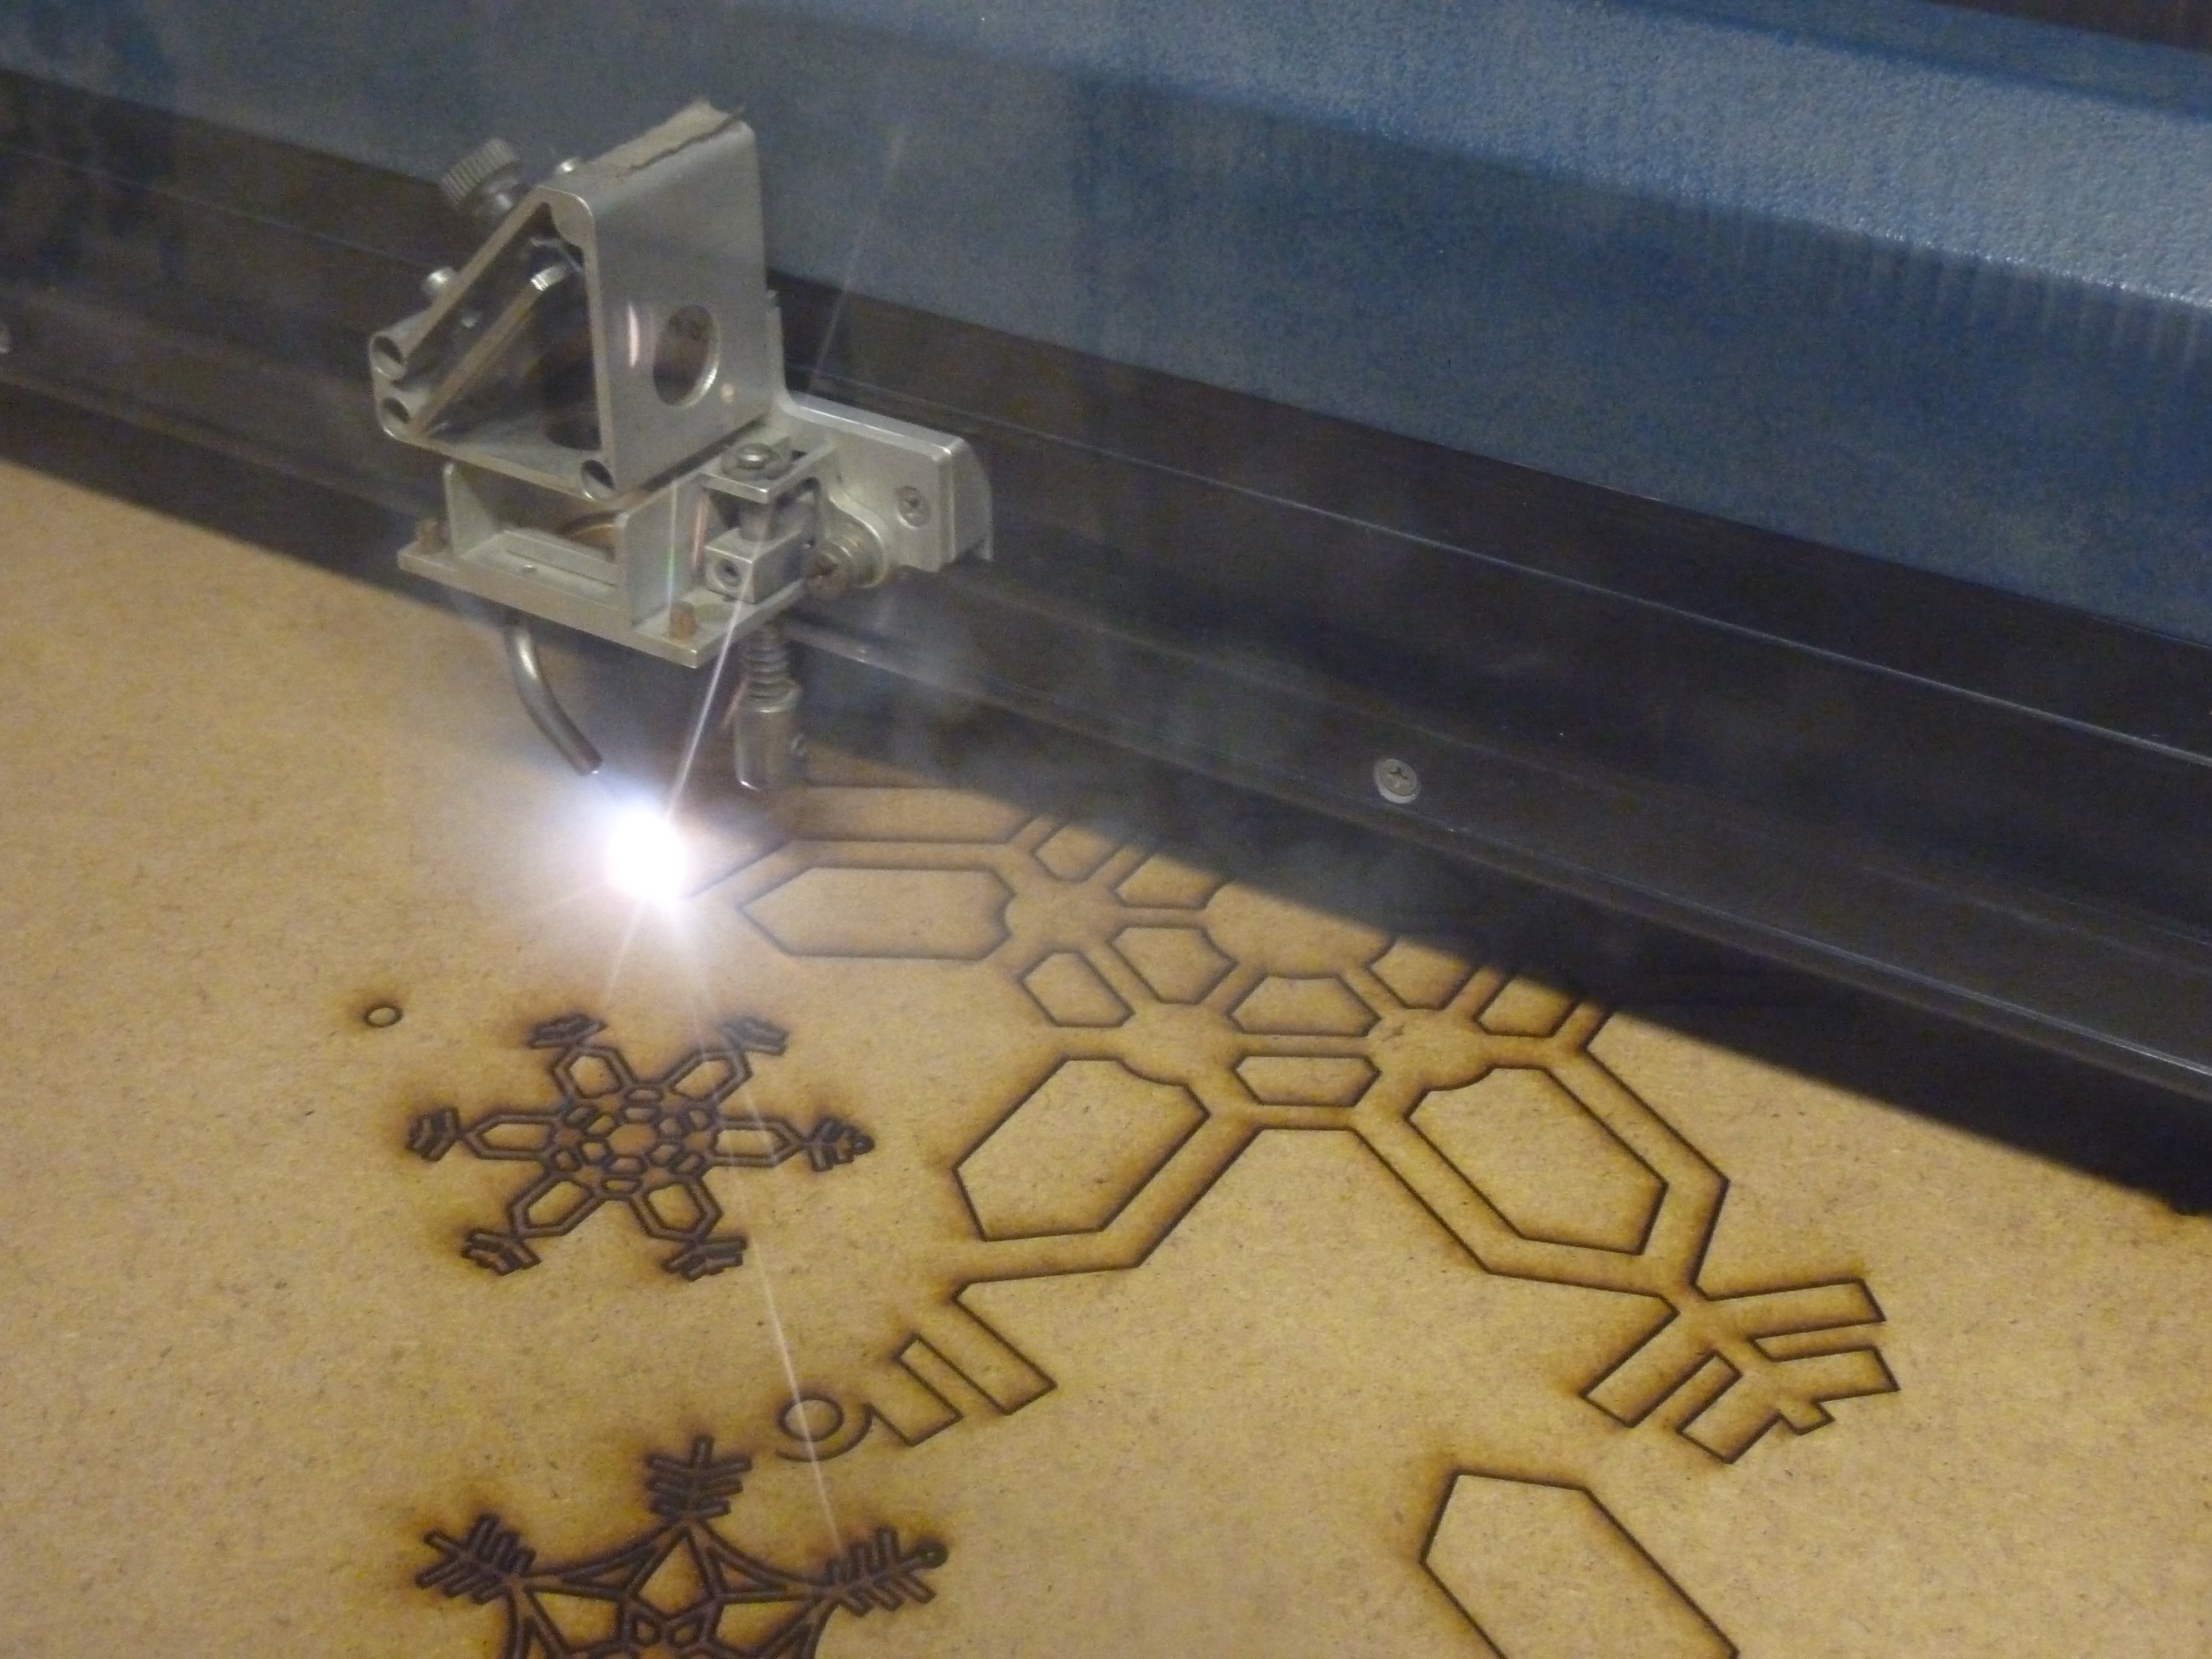 A Laser Cutter In Action